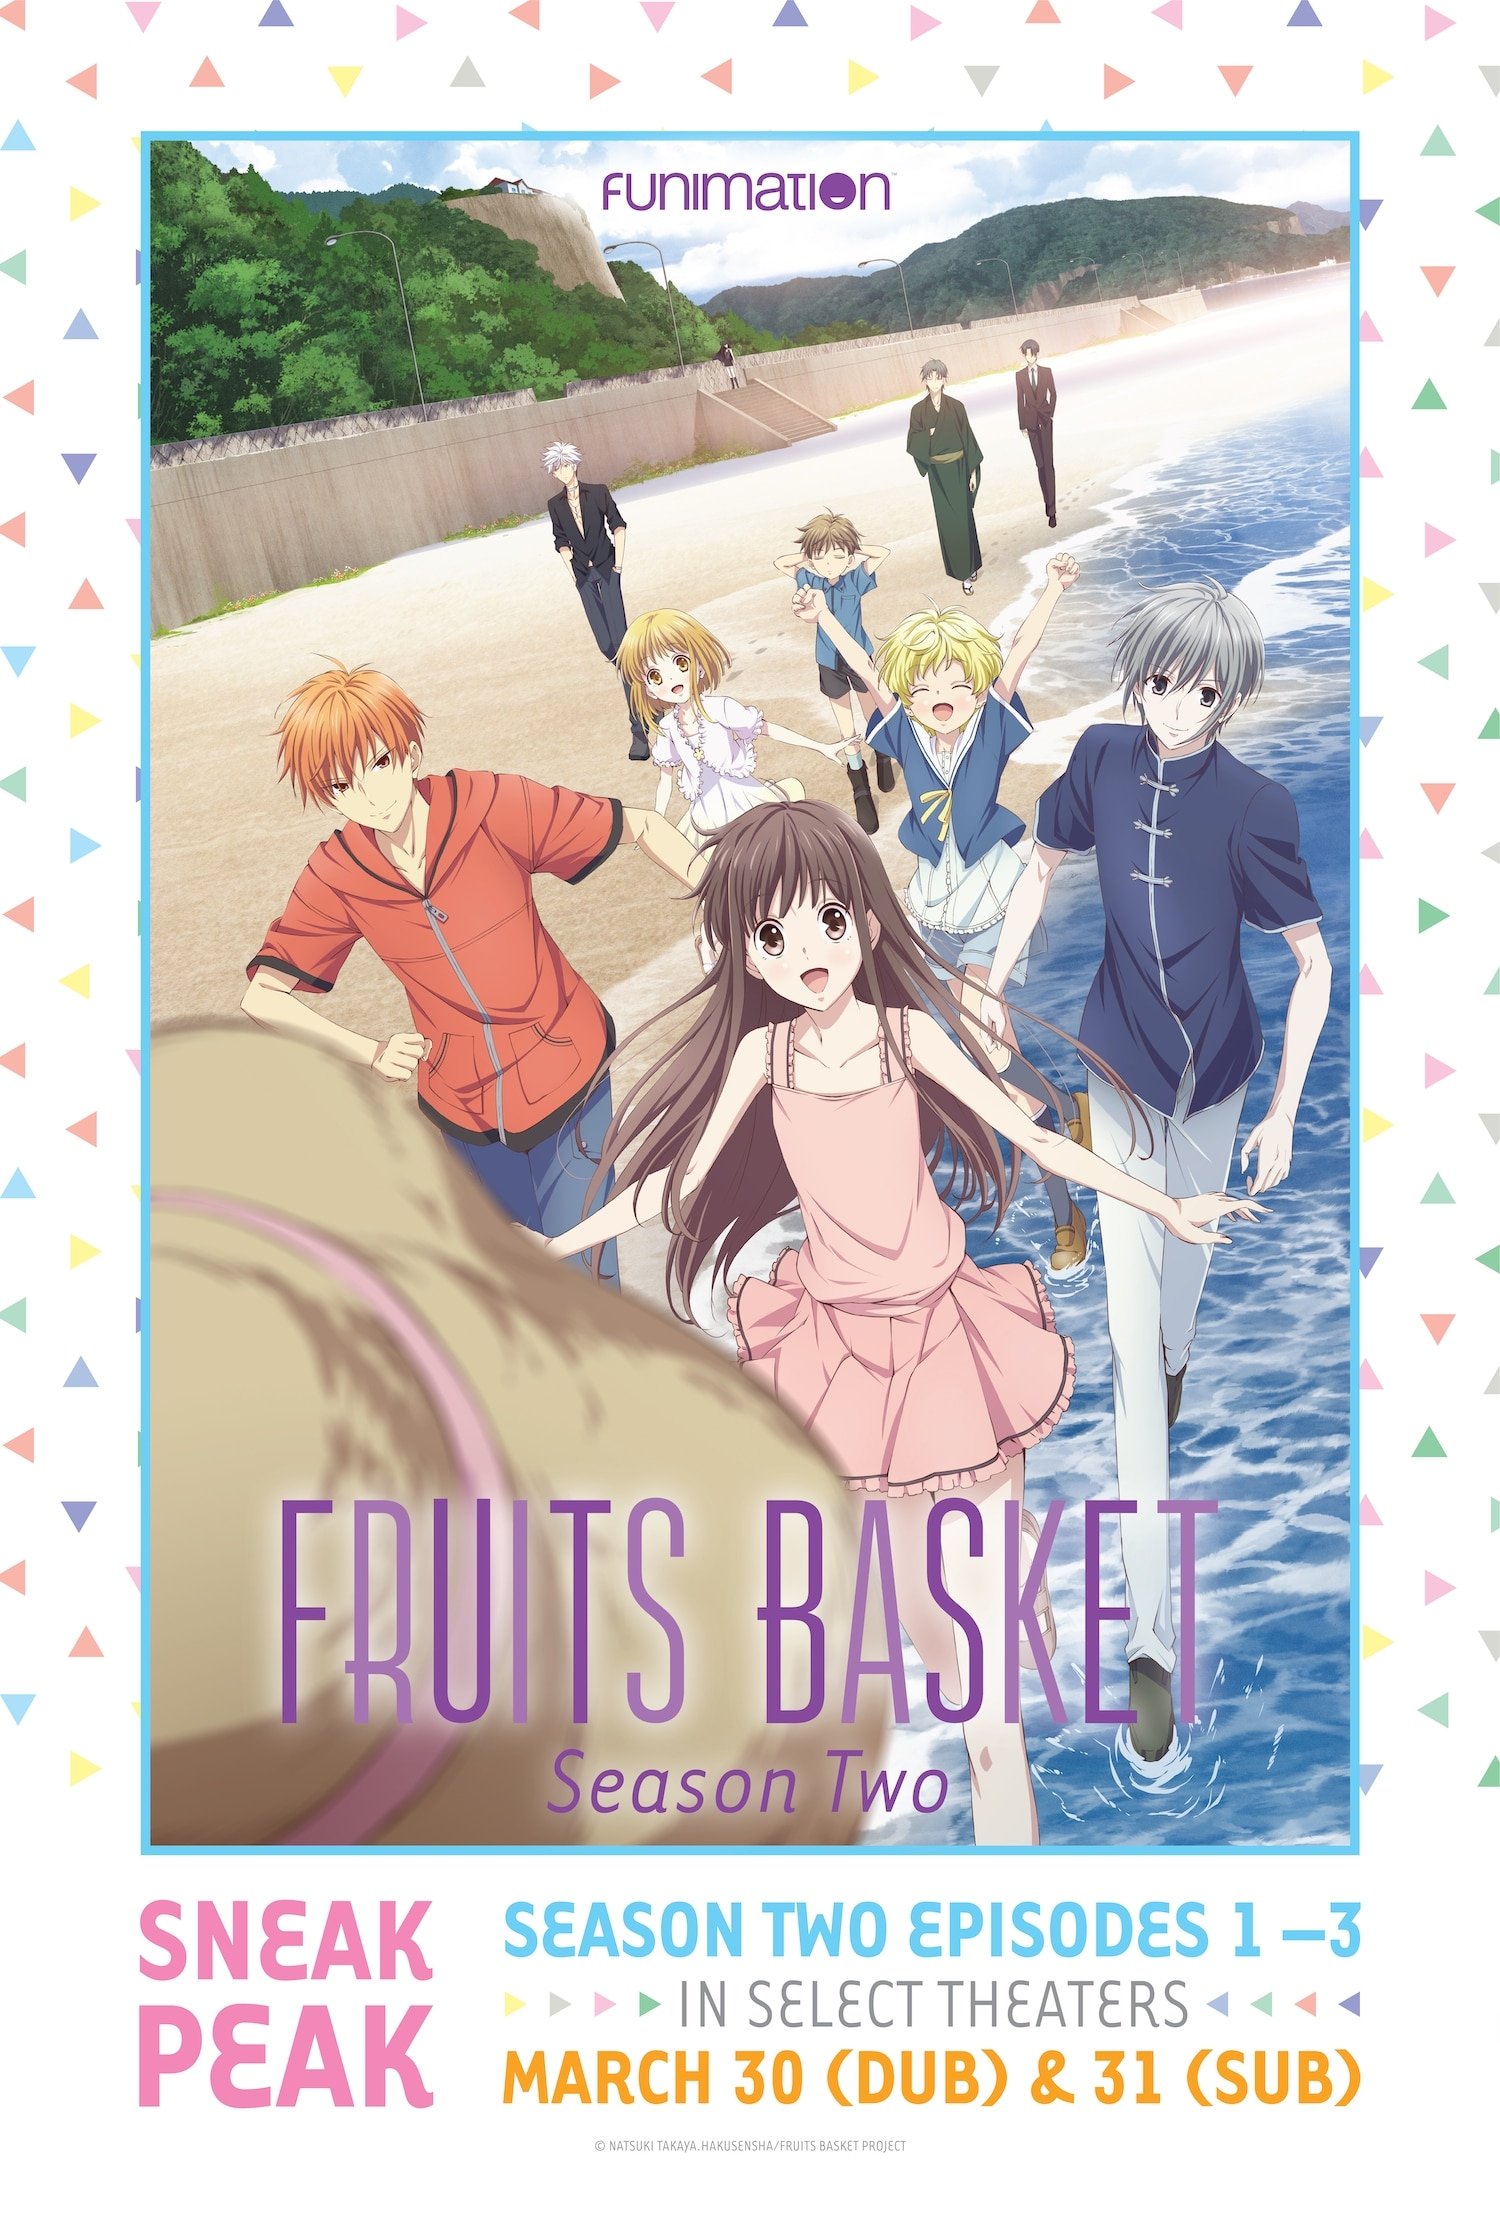 IT'S A GREAT DAY TO BE A DUB FAN! @funimation #fruitsbasket